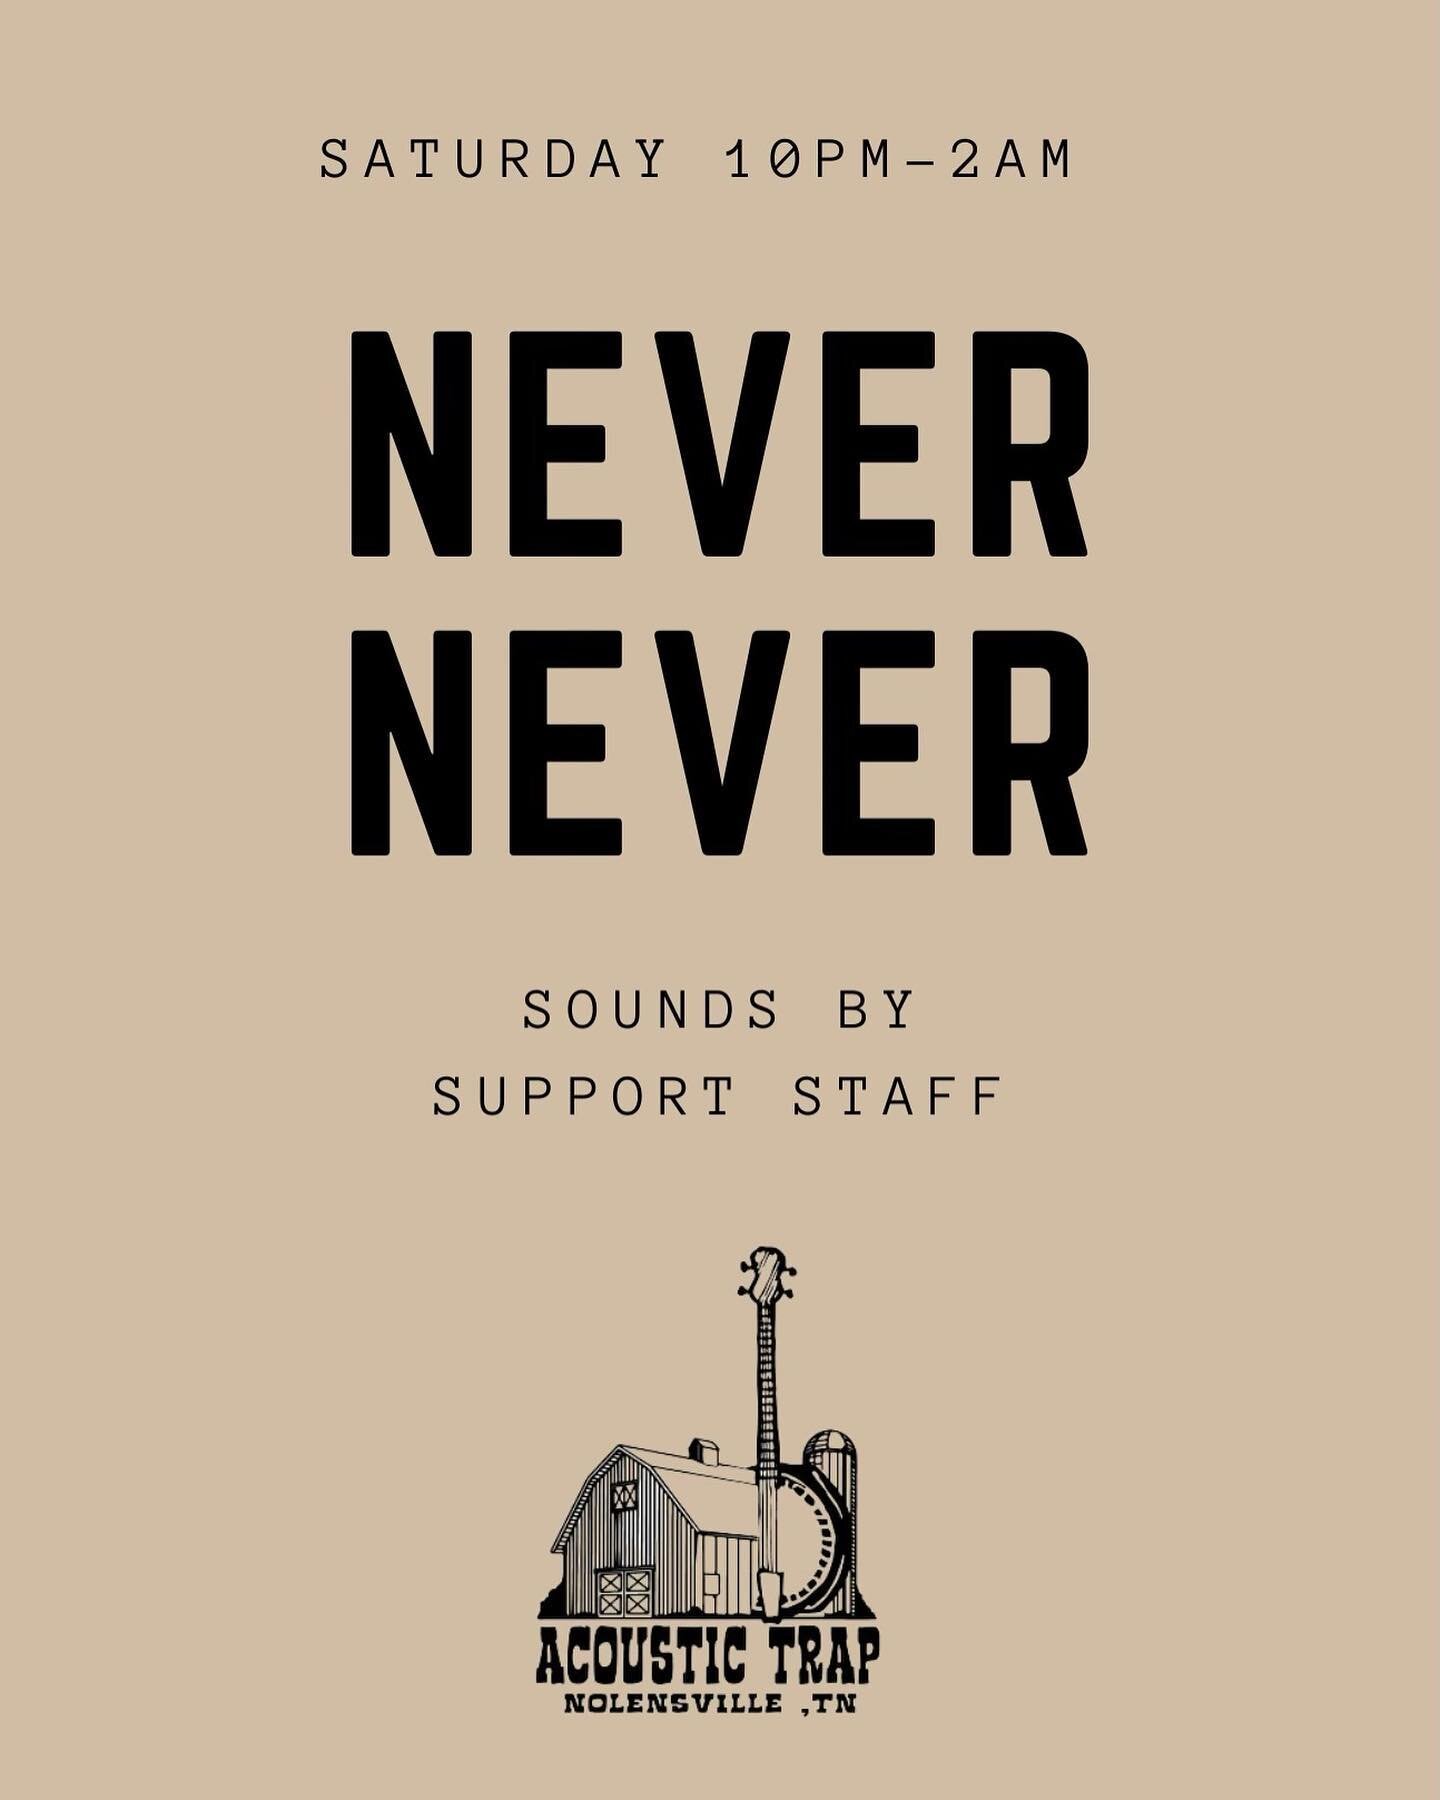 Legends @supportstaffofficial dropping by tonight to spin up some great tunes for your Saturday night party. Can&rsquo;t wait to see you in the mix! xoxo